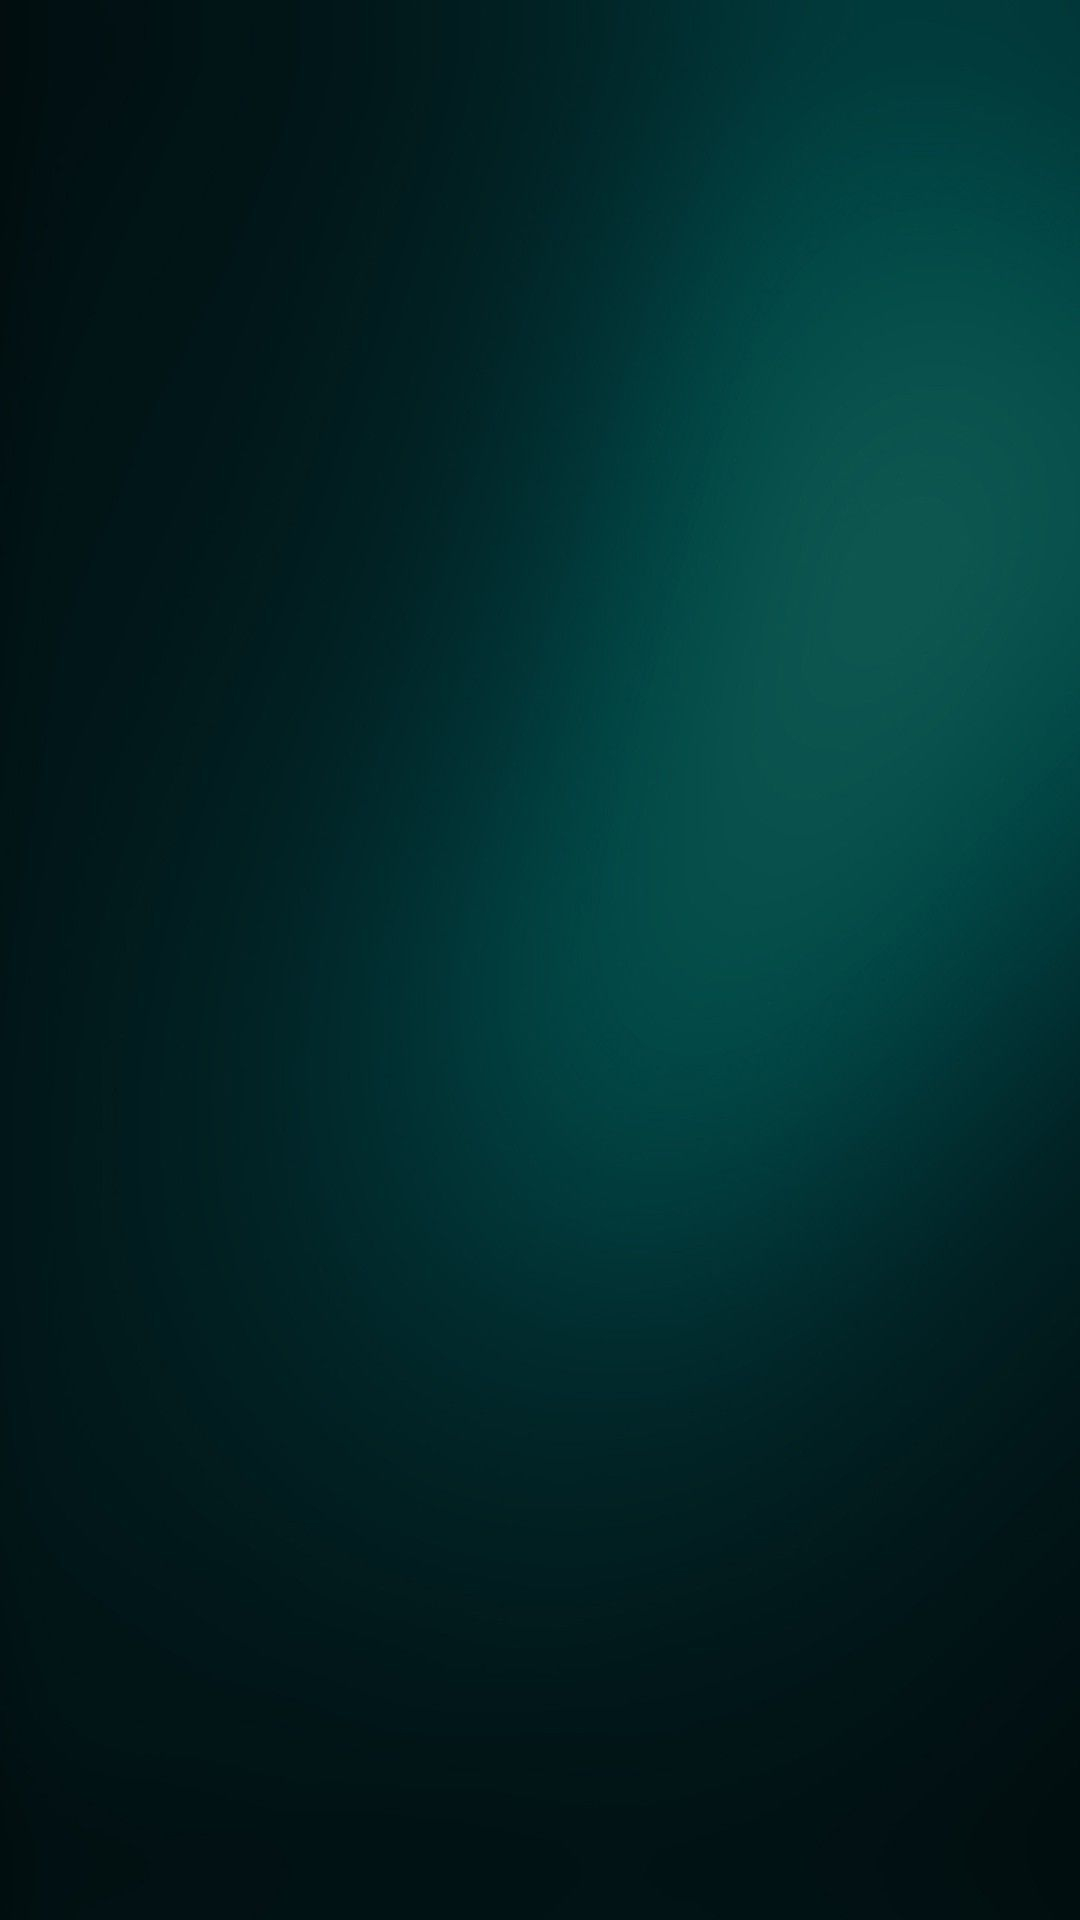 Turquoise And Black Wallpapers and Backgrounds 4K, HD, Dual Screen